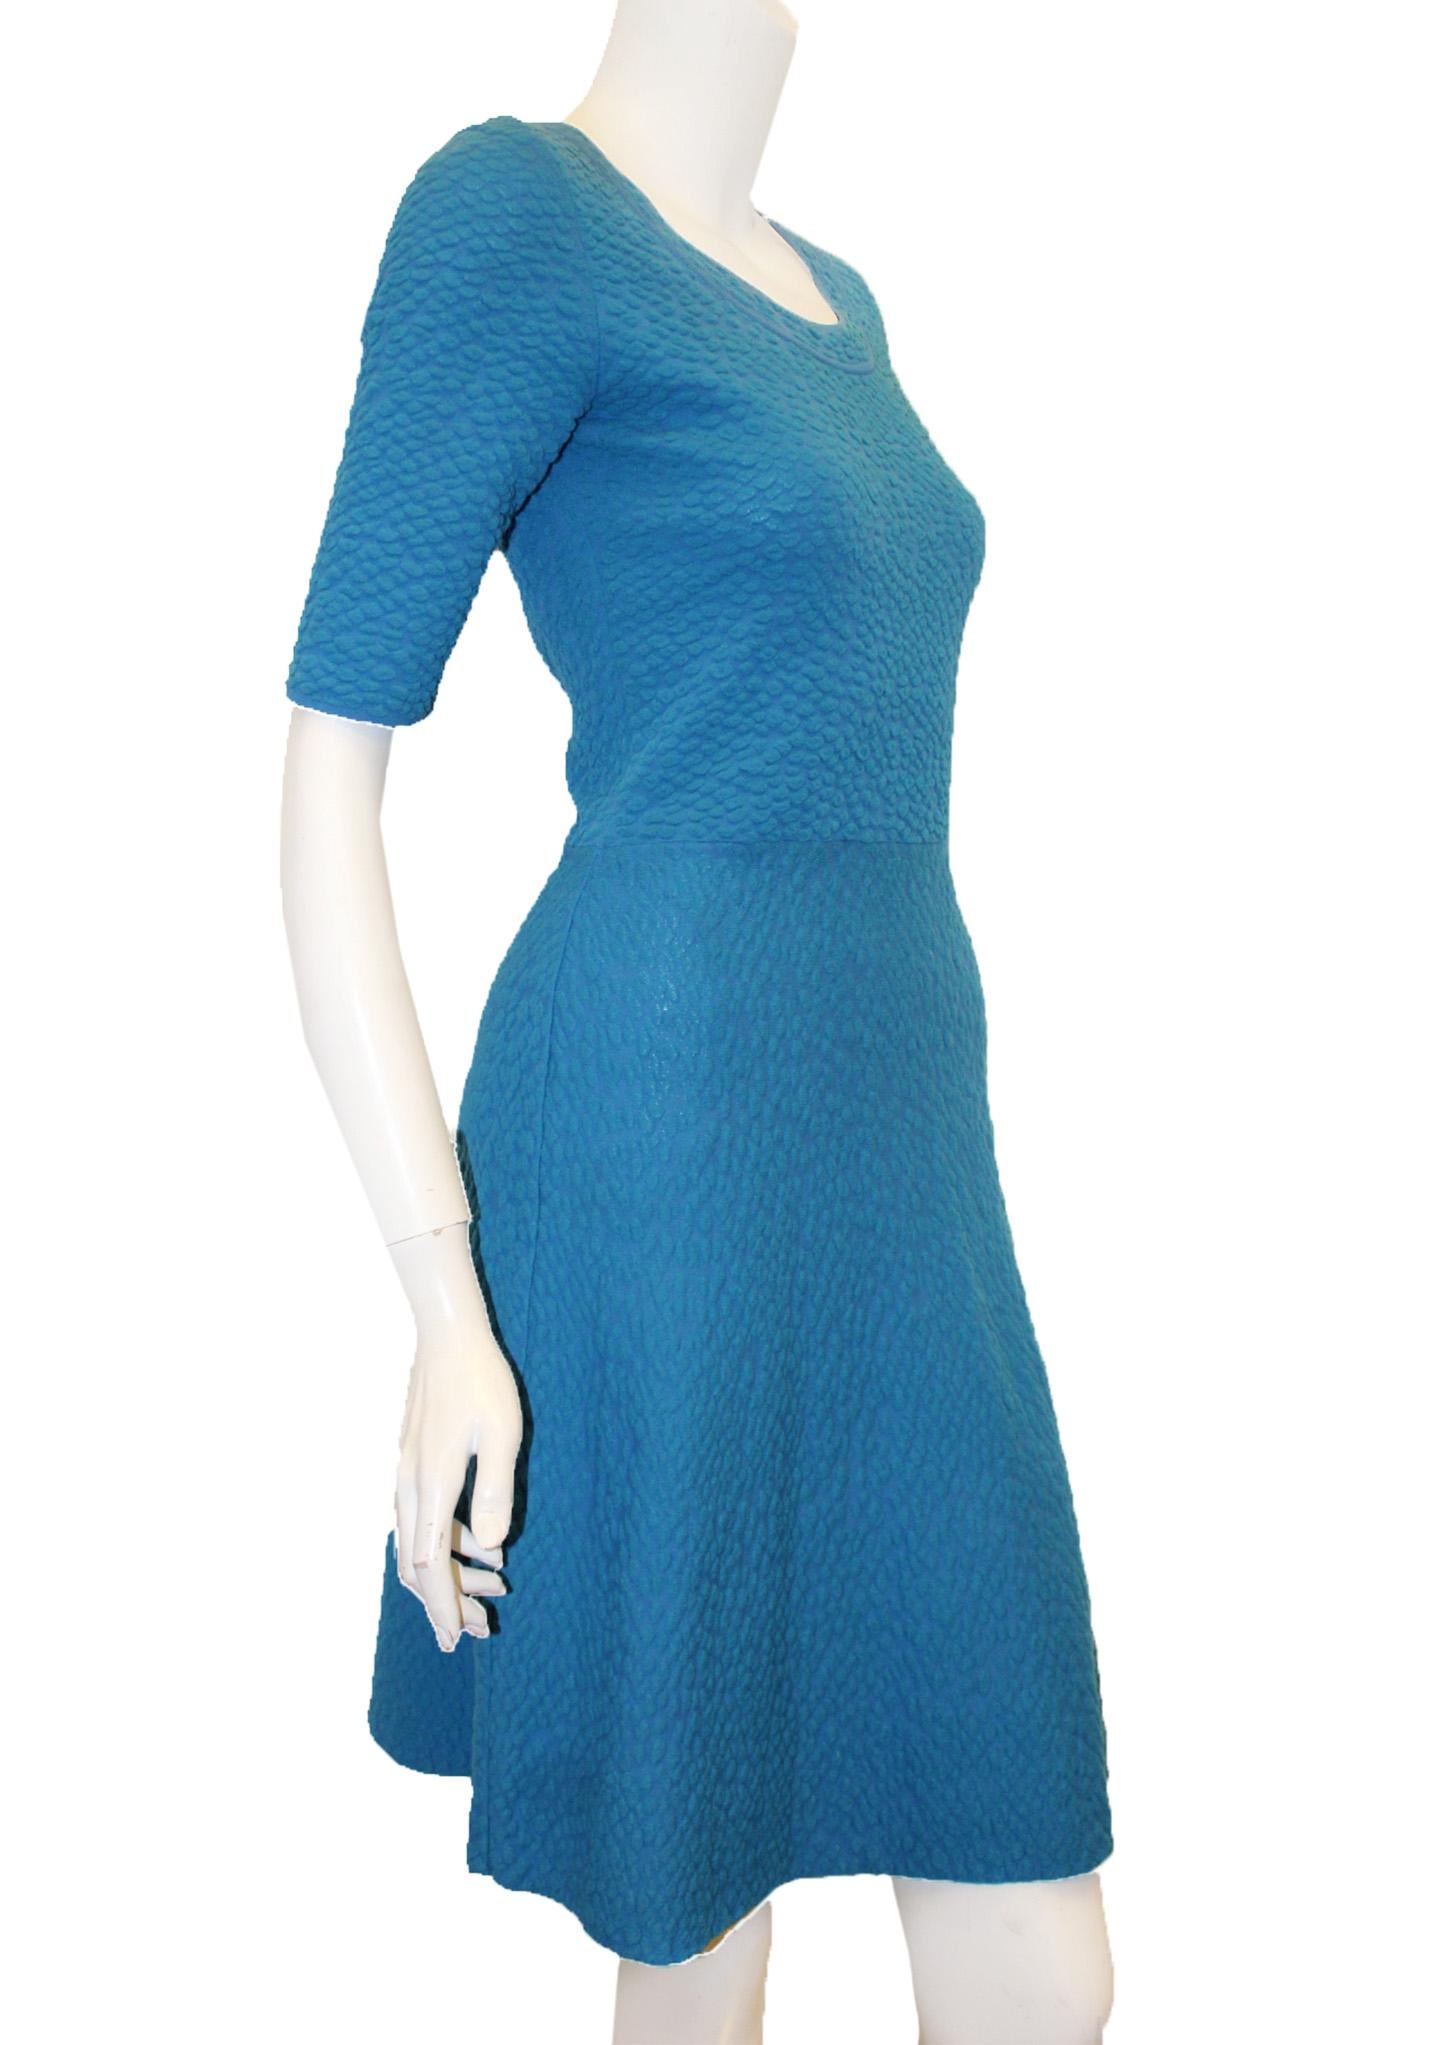 Missoni textured turquoise short sleeve knit dress with round collar is not lined and is the ideal summer dress that can transition to the fall by adding a light coat or a cardigan.  This dress has minor pulls, otherwise, it is in good condition.   